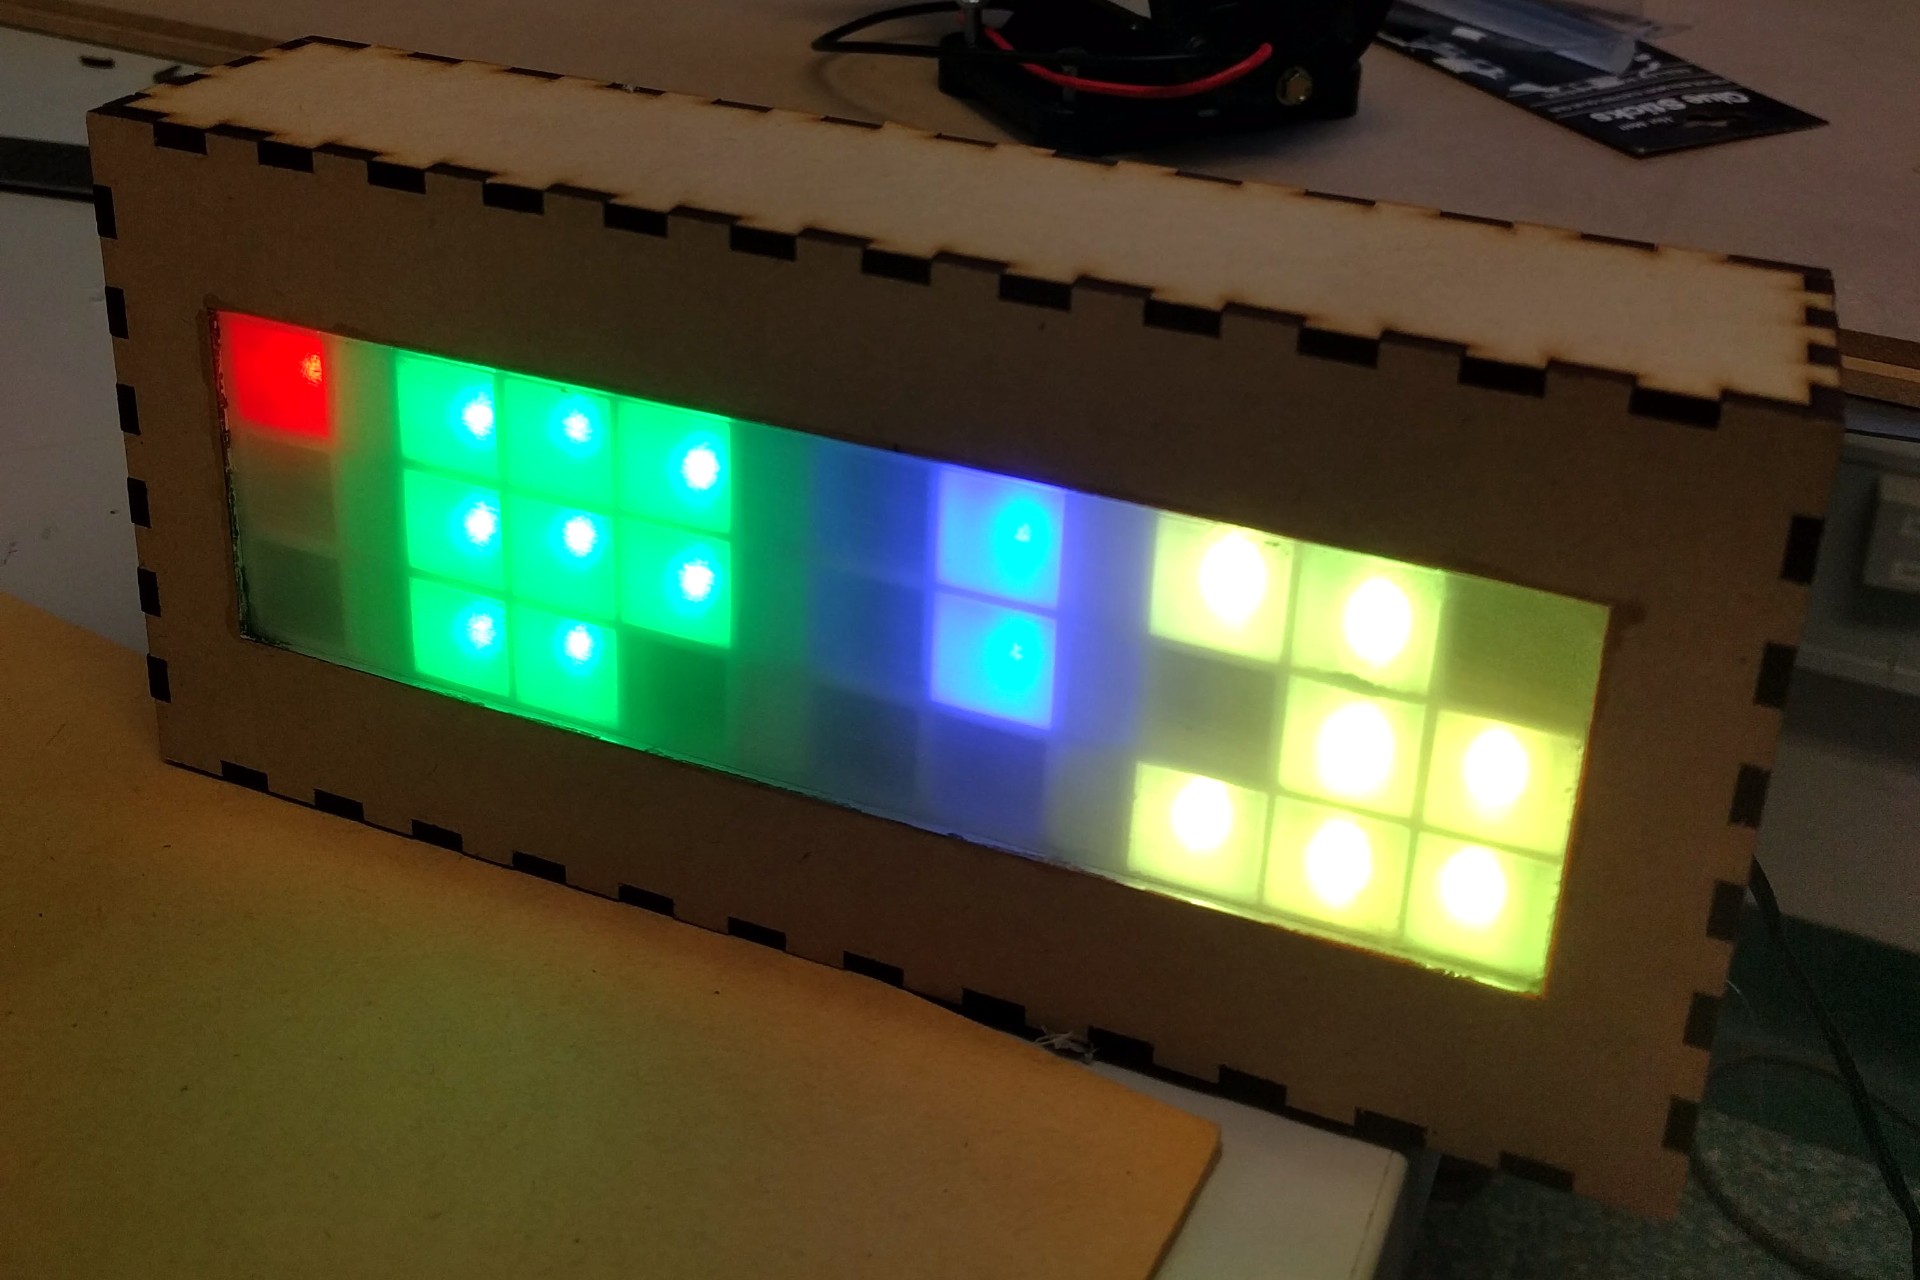 Making a unique clock with some LED magic.